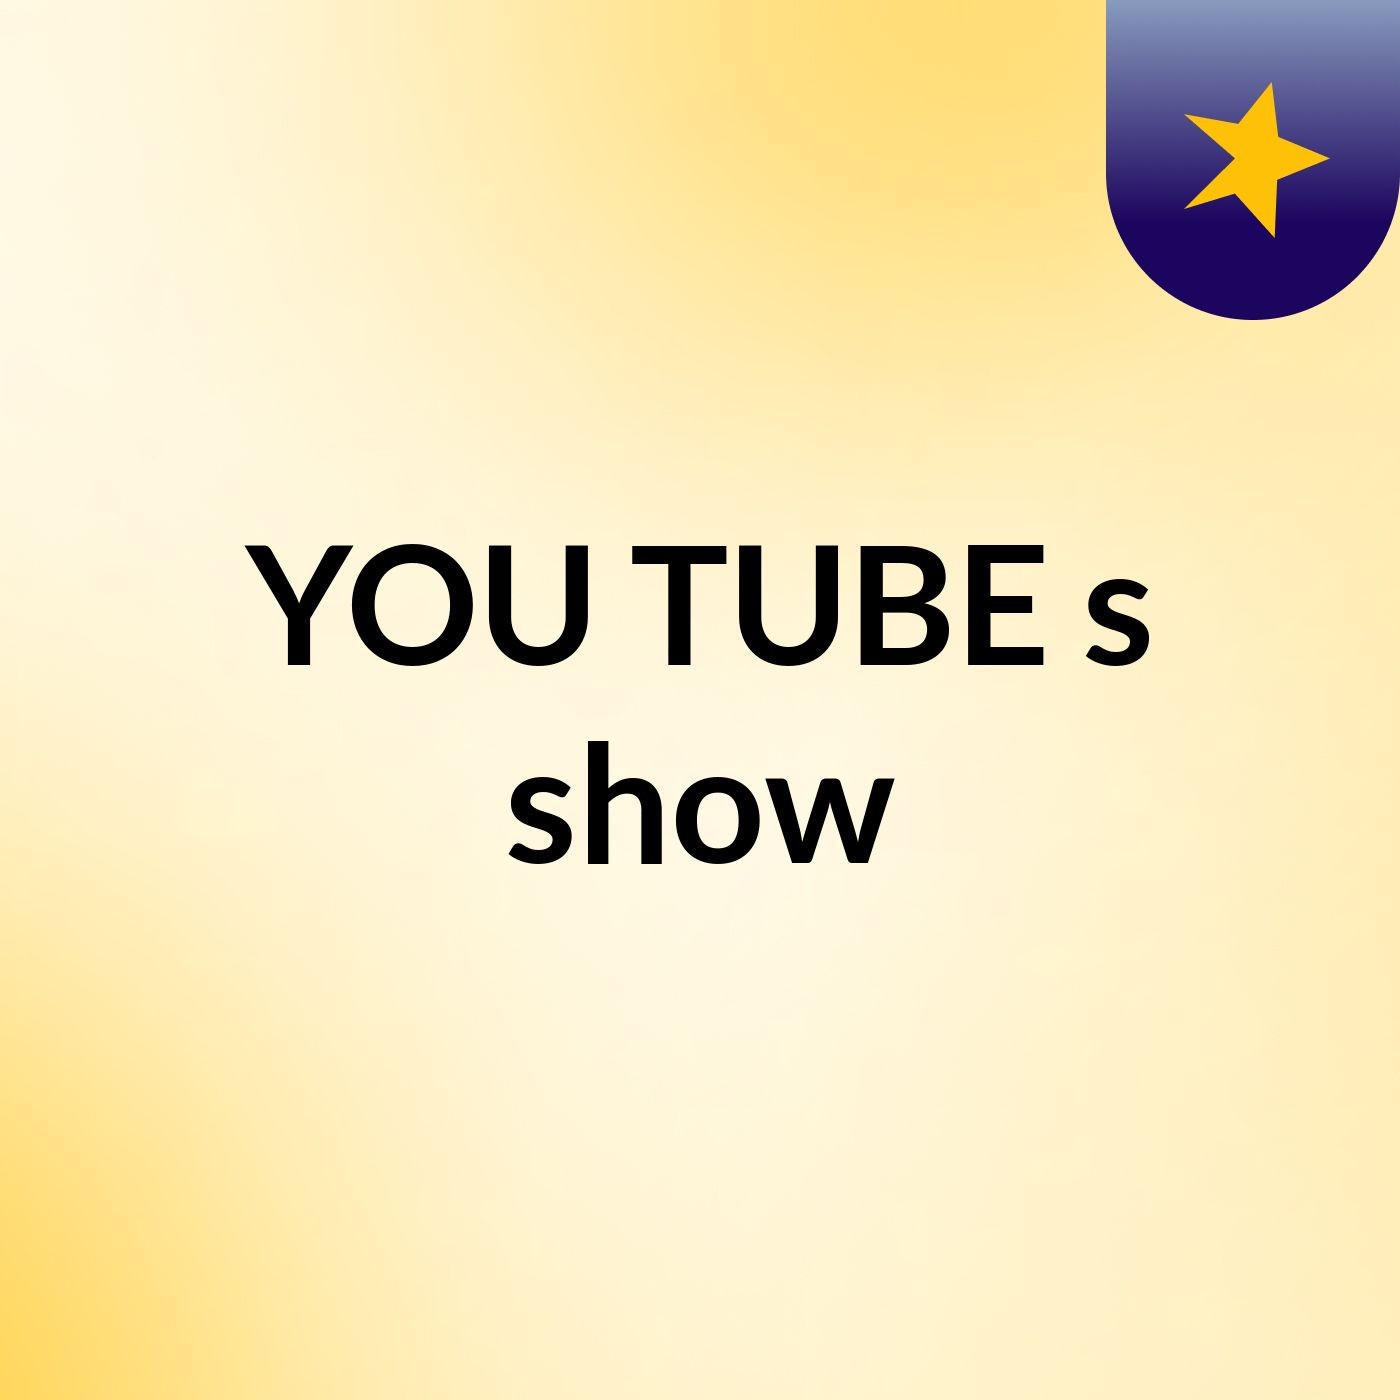 YOU TUBE's show